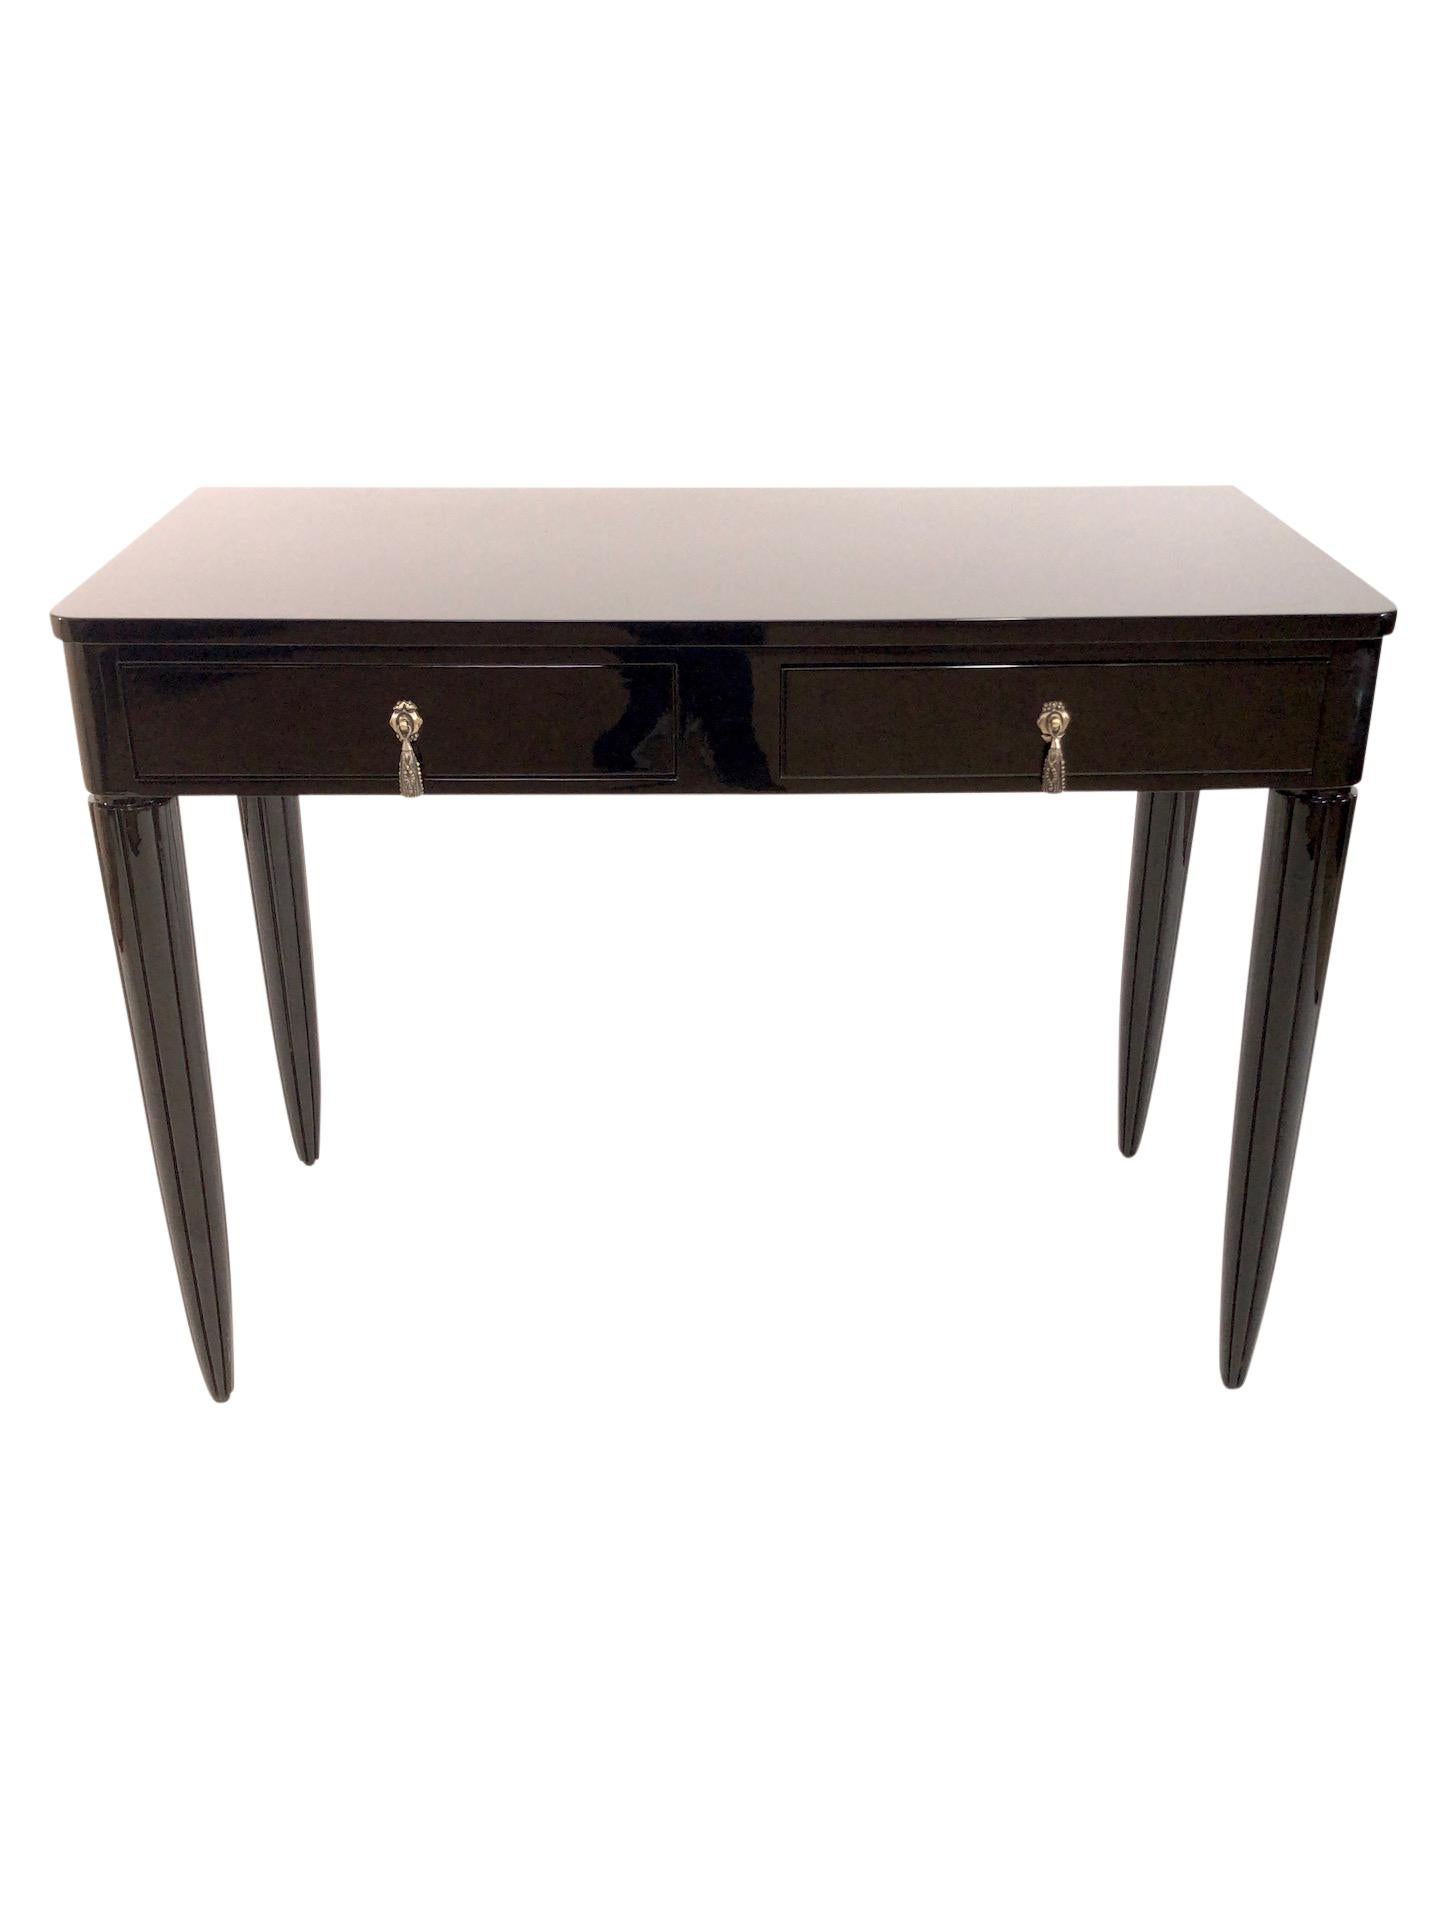 This early French Art Deco, circa 1925 could be used as a console in the entrance, too. 
The little desk has two drawers with typical fittings for this glamorous era. 
High gloss black piano lacquer 
Channeled table-legs.